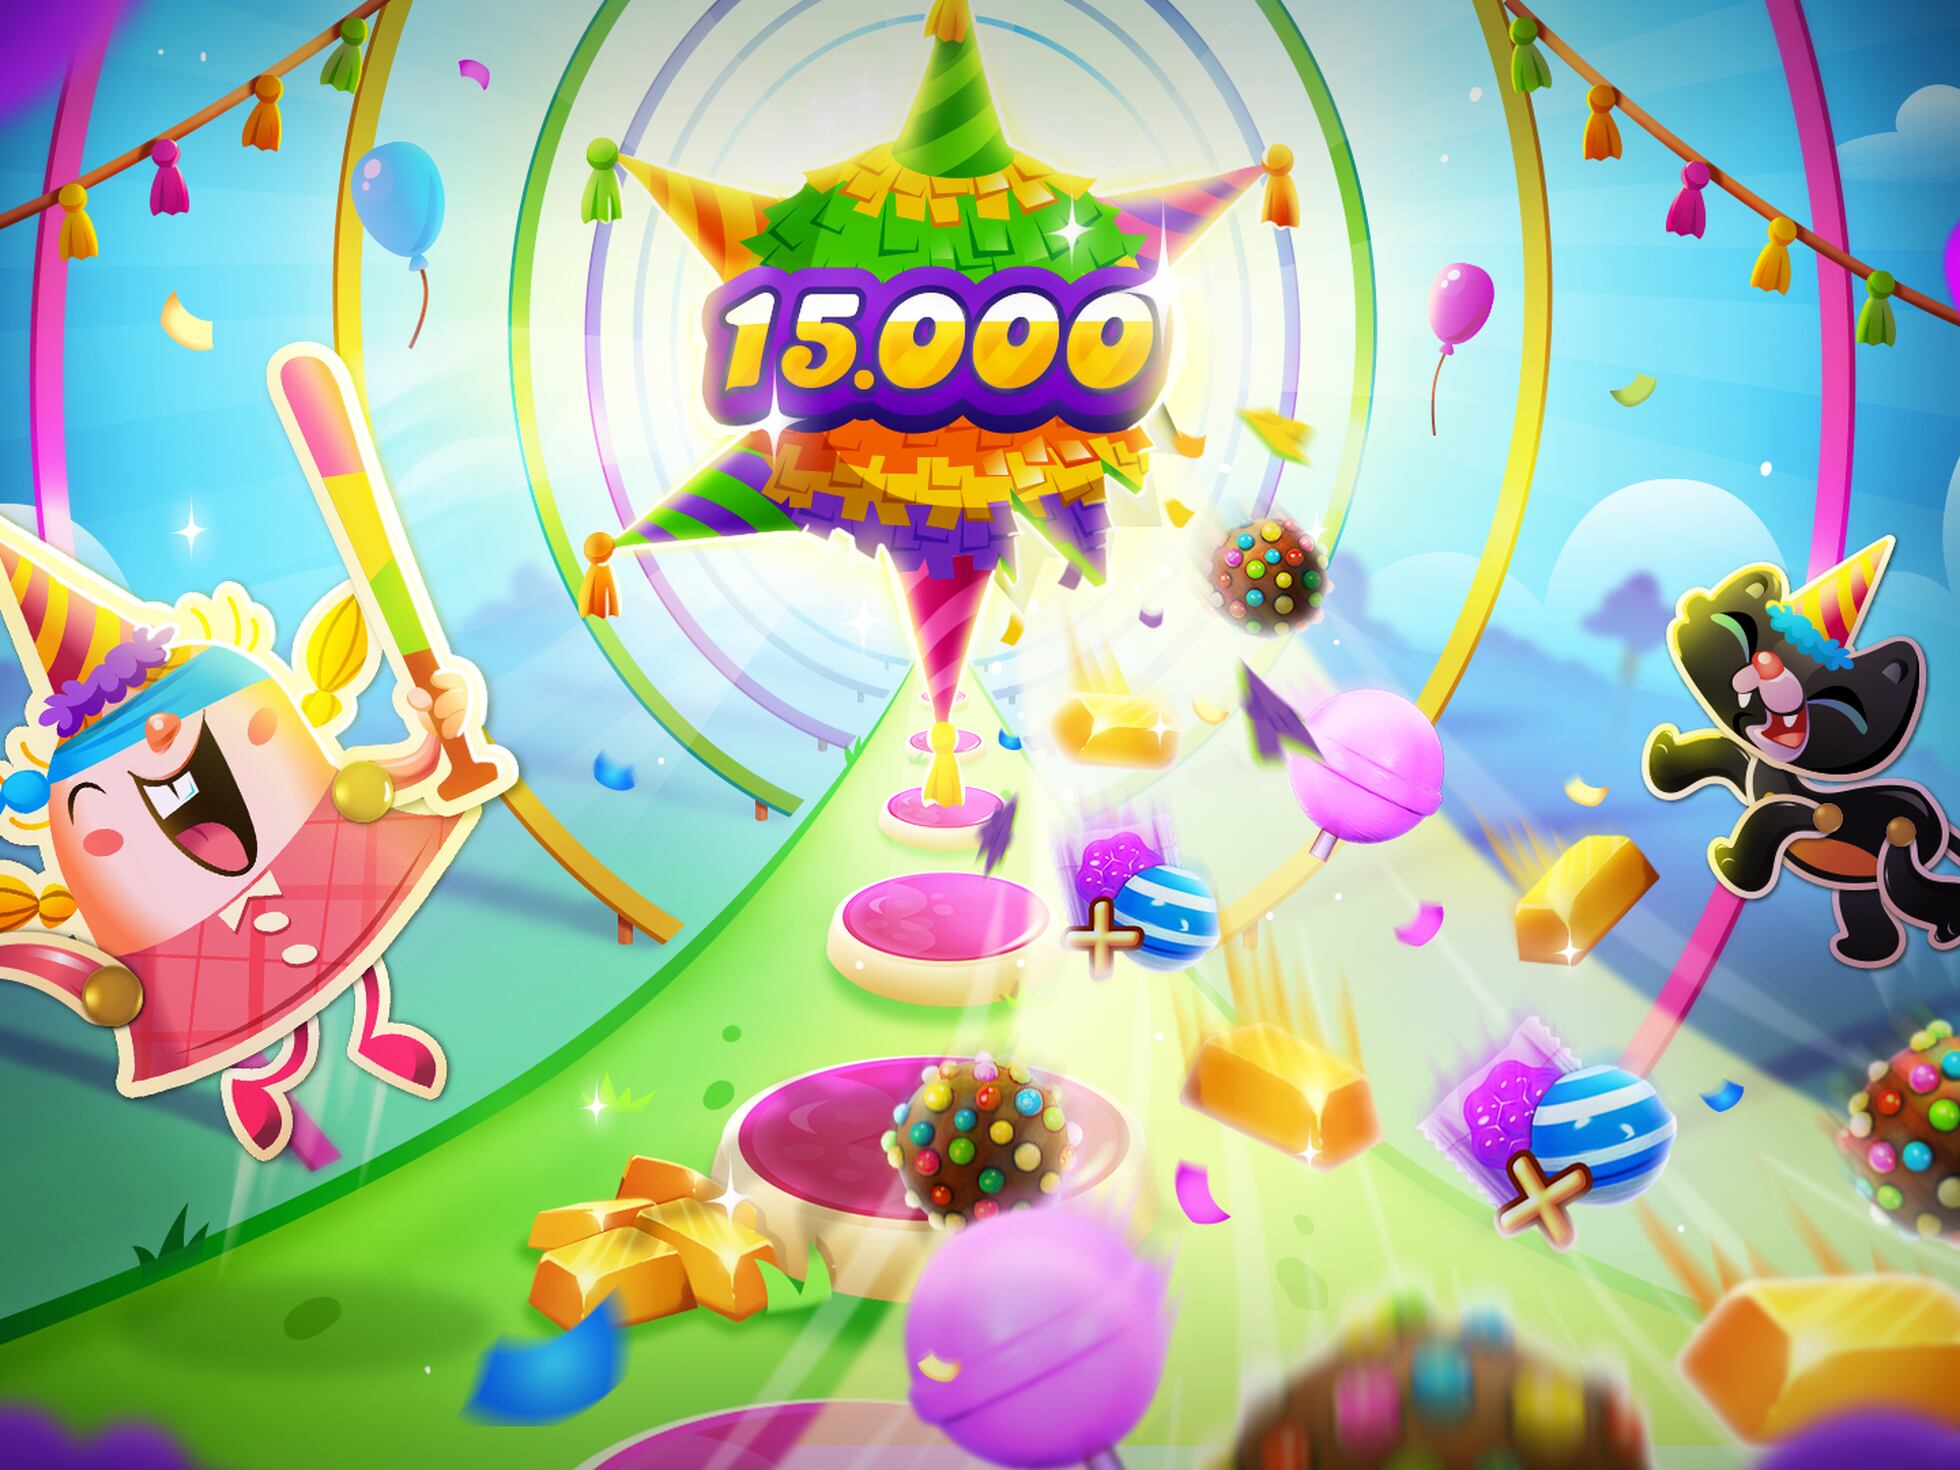 Candy Crush Saga Launches New Features for 10th Anniversary